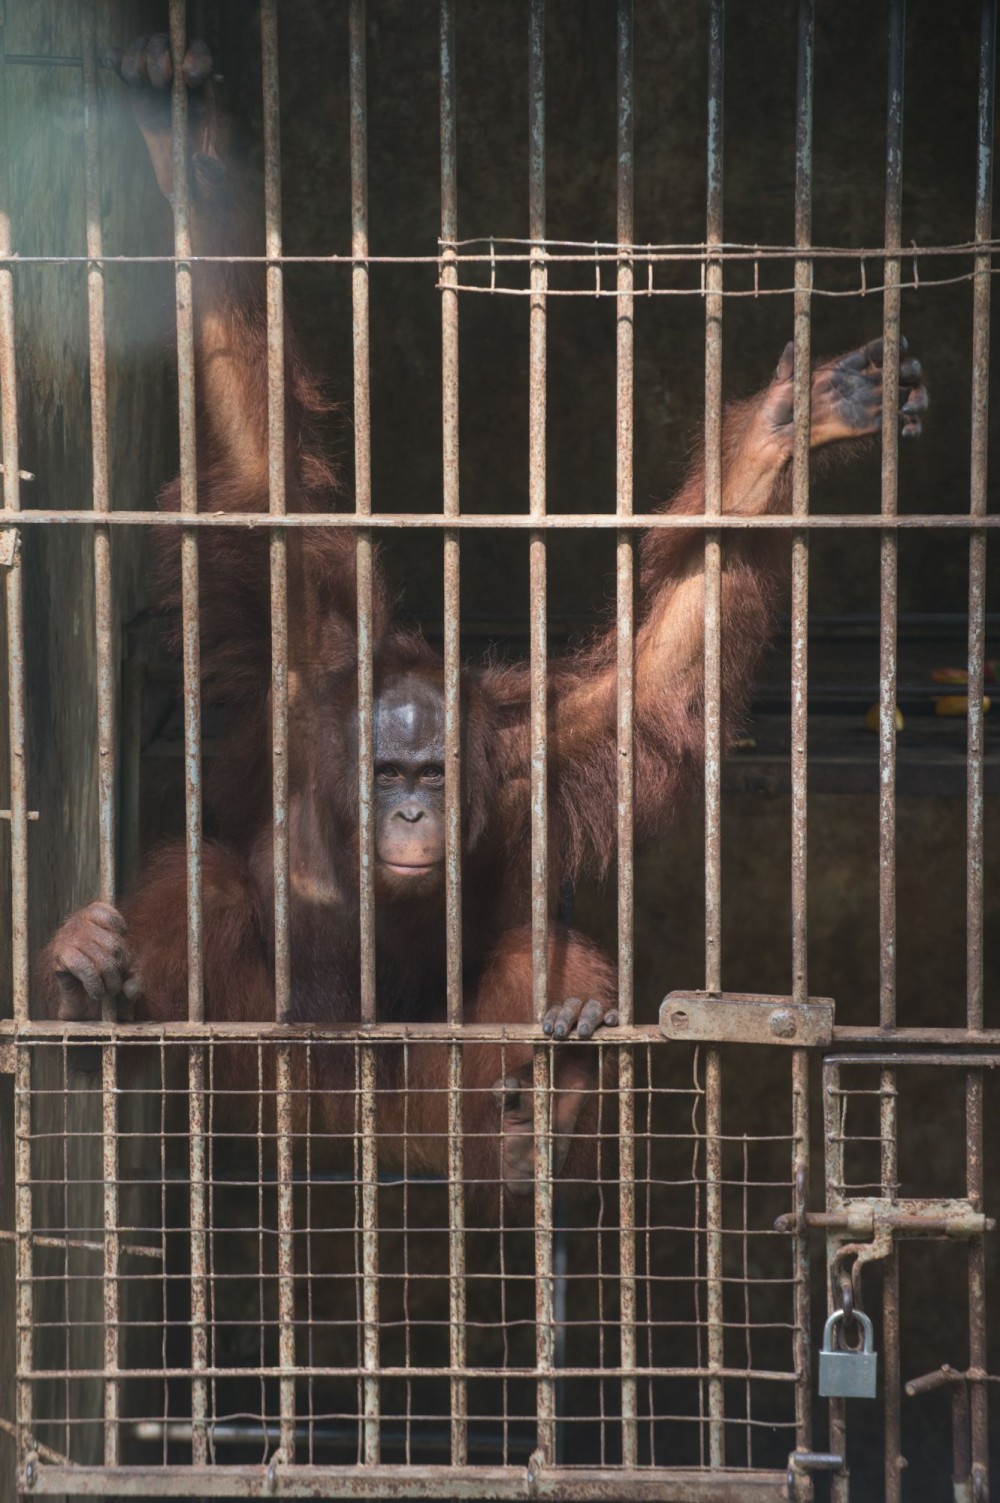 A monkey hanging from the bars of a cage with their arms and legs